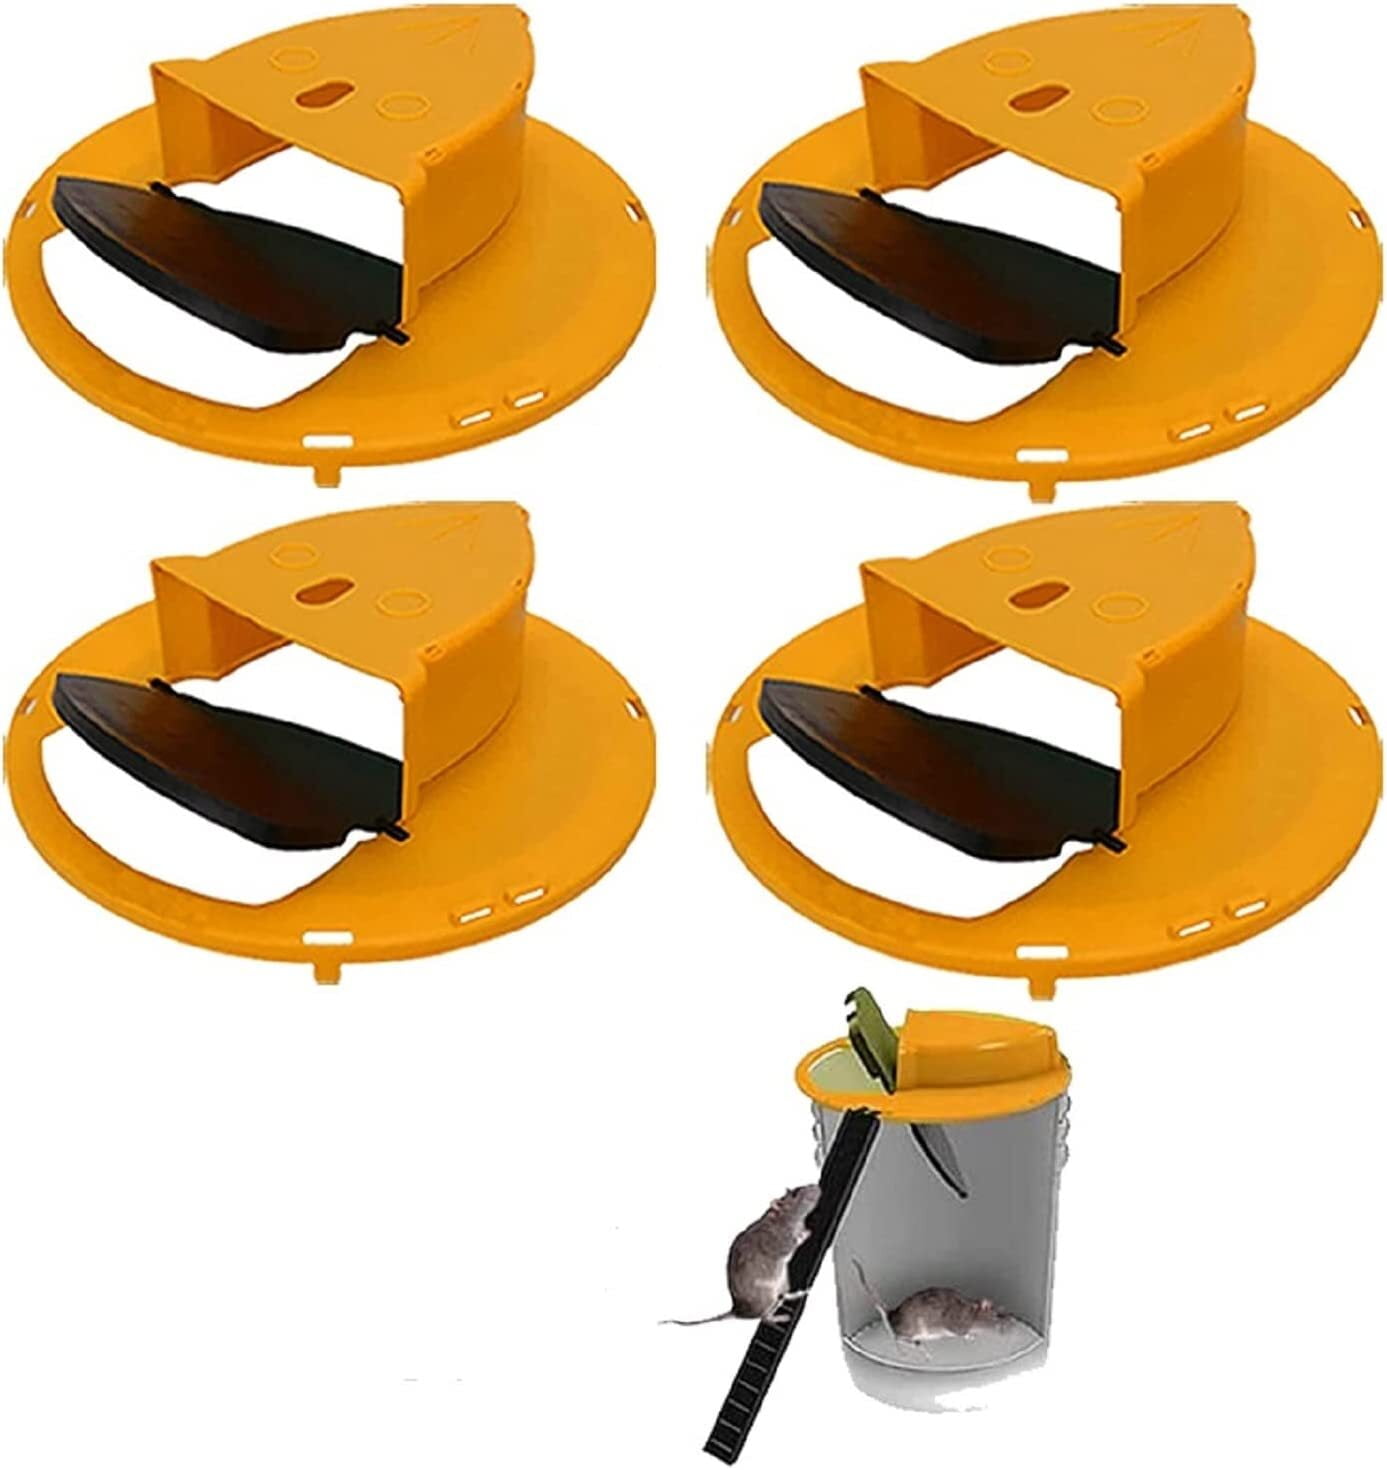 INFISU 4 Packs Bucket Mouse Traps,Mousetrap Slide Bucket Lid, Mouse  Catching Tool,Mouse Trap with Flip Lid Mousetrap Catcher Indoor Outdoor 